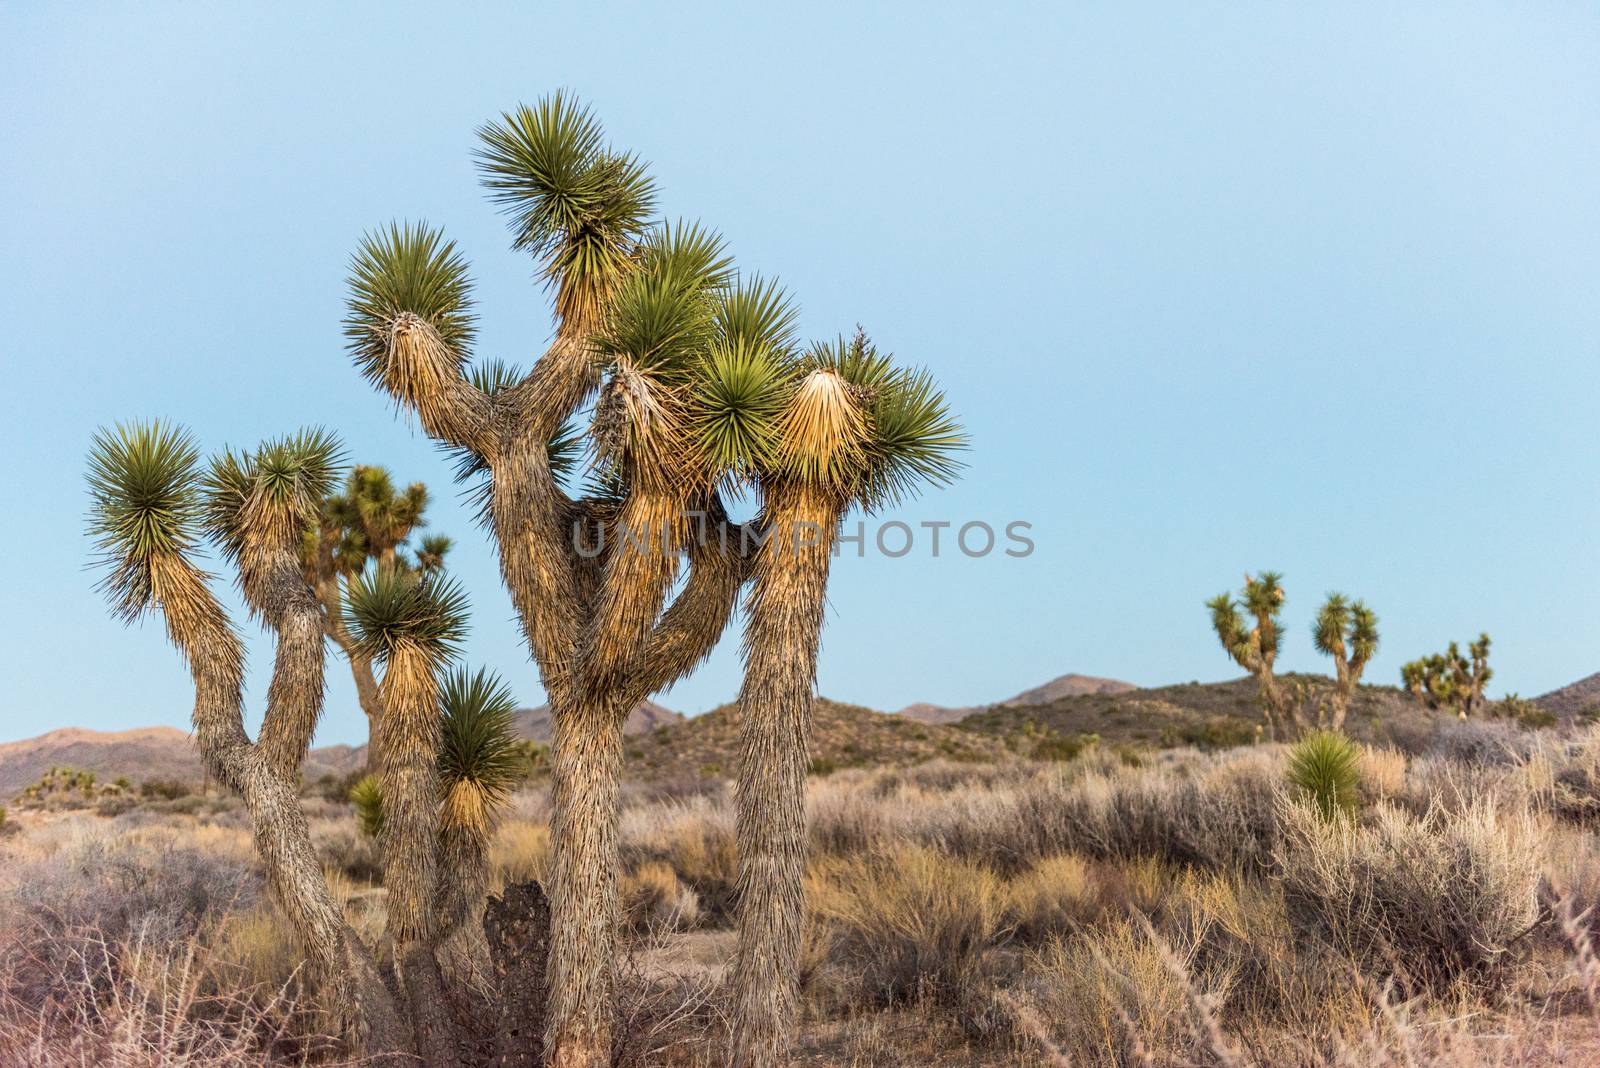 Joshua trees (Yucca brevifolia) at dusk off Stubbe Springs Loop  by Njean